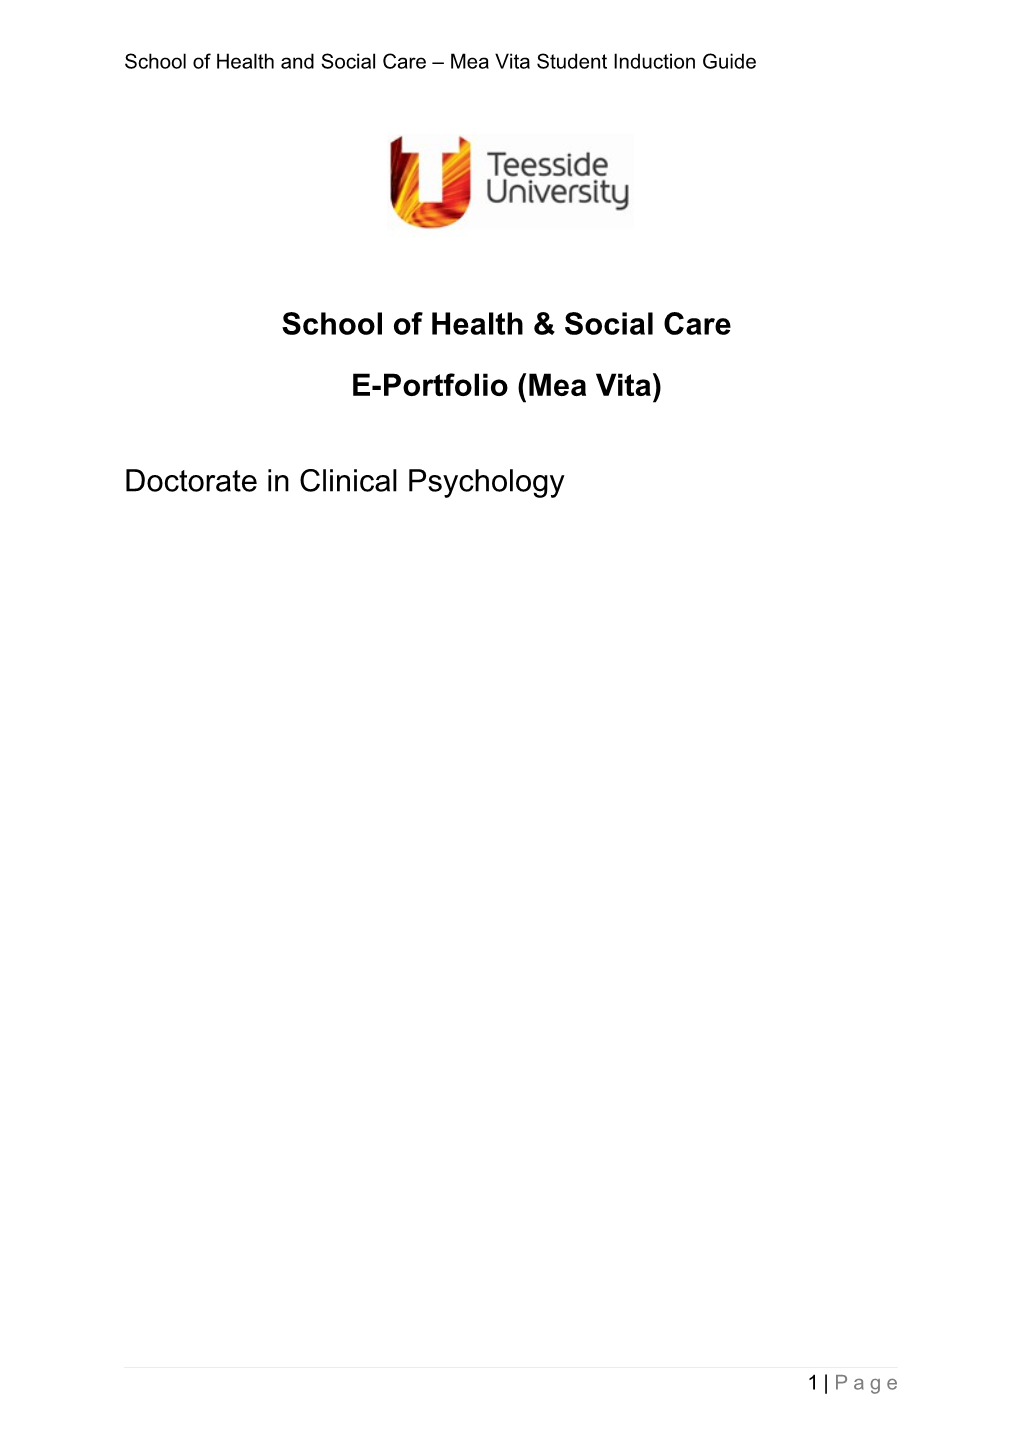 School of Health and Social Care Mea Vita Student Induction Guide